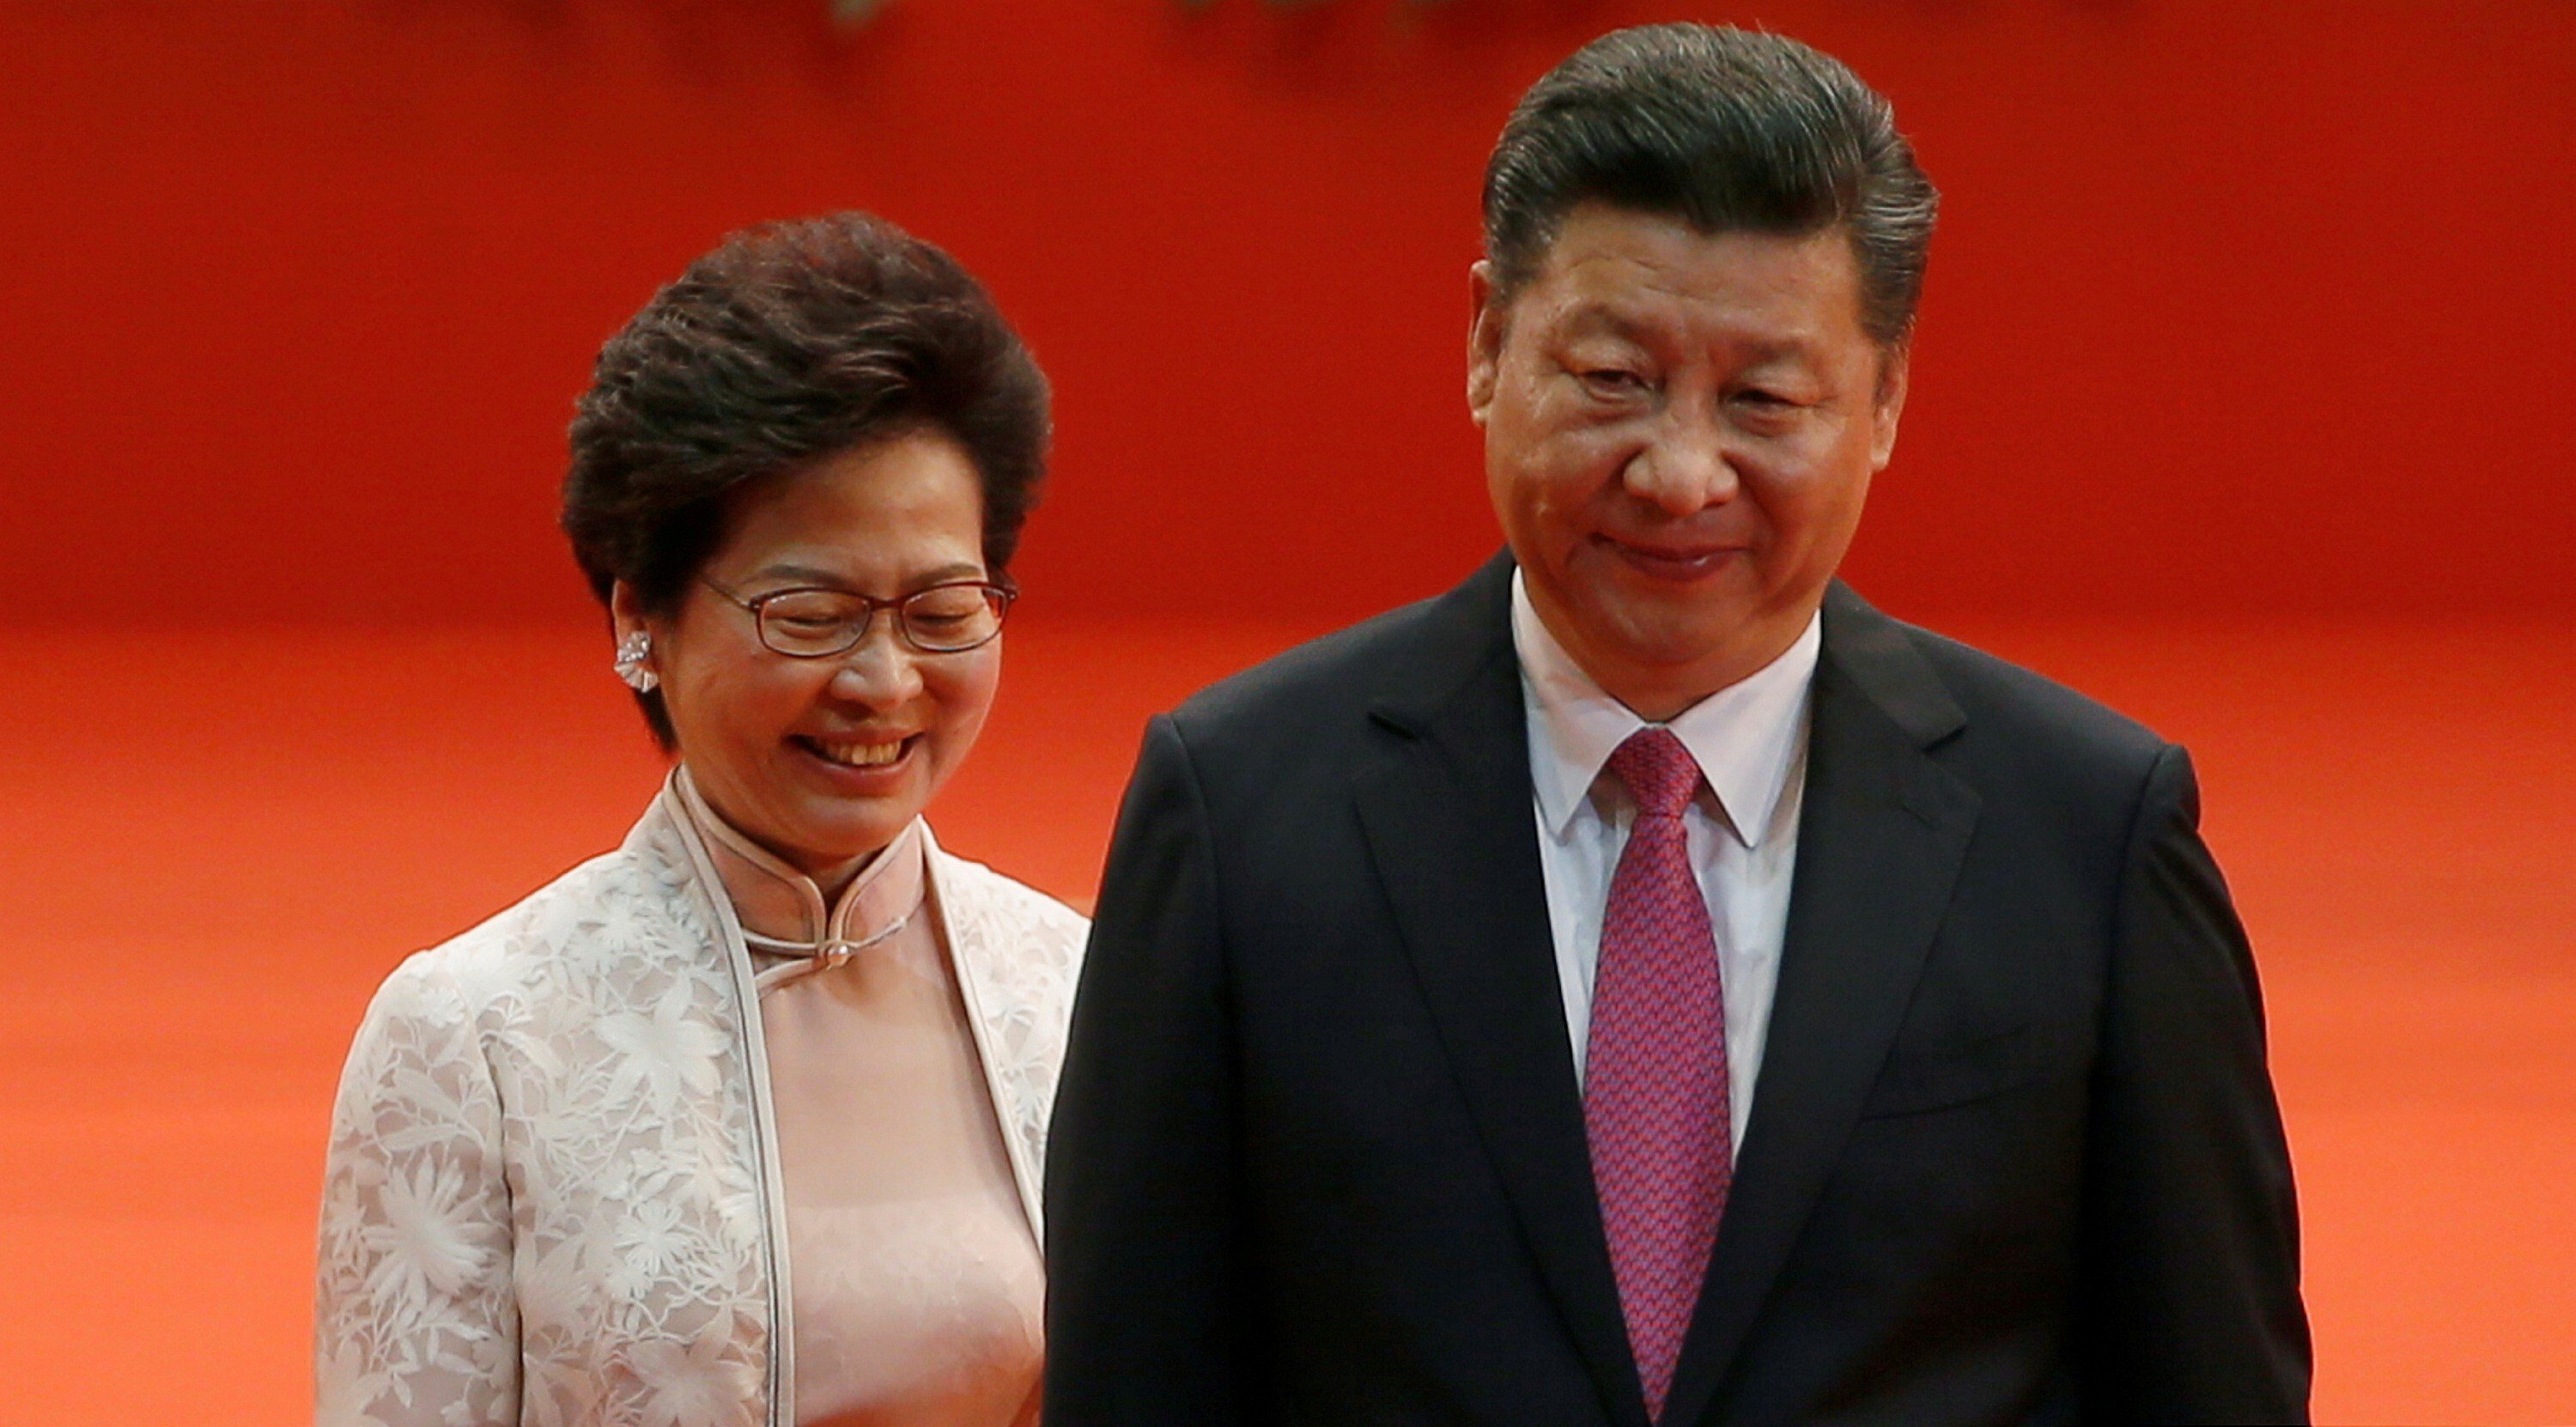 Hong Kong Chief Executive Carrie Lam is said to have pushed hard to have four opposition lawmakers disqualified from the next election be allowed to retain their seats in an extended Legco term. She got her wish, but does that represent Beijing giving her ‘face’, or presenting her with a test. Photo: Reuters